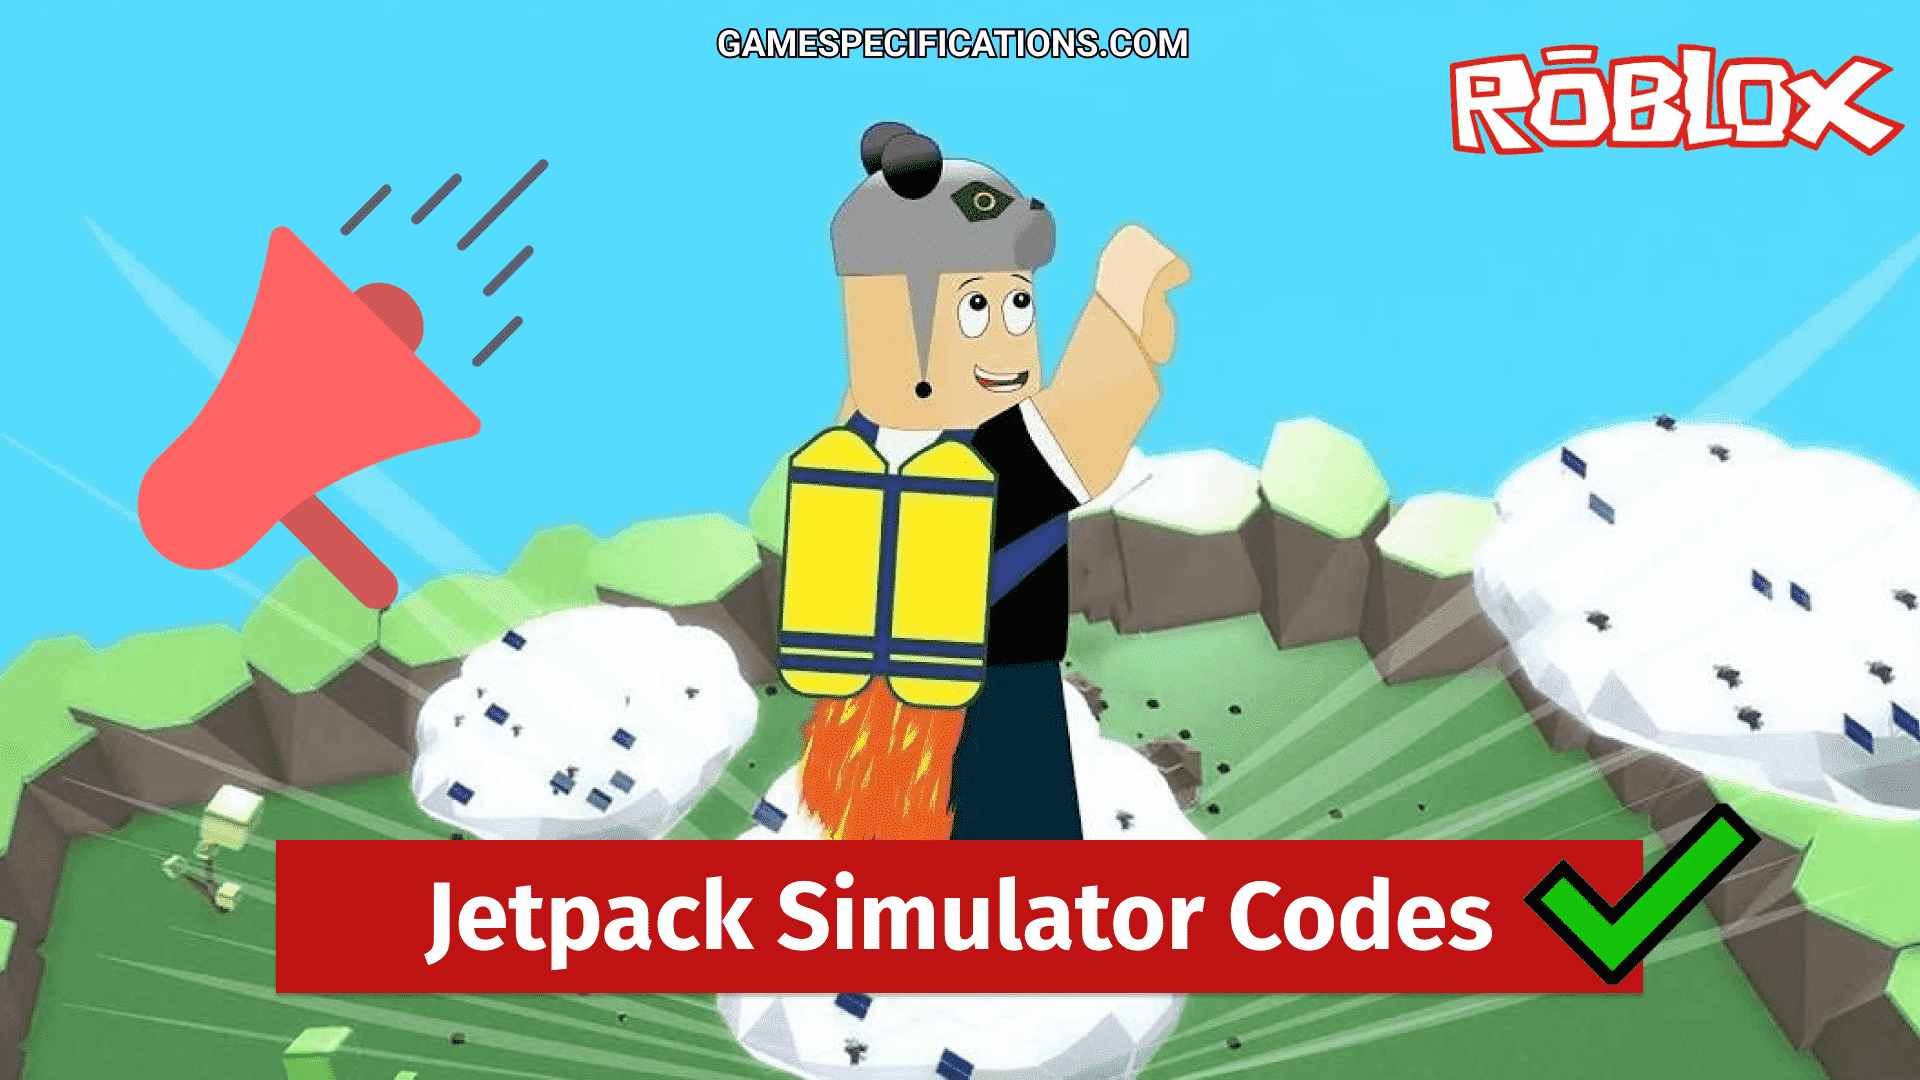 Roblox Jetpack Simulator Codes June 2021 Game Specifications